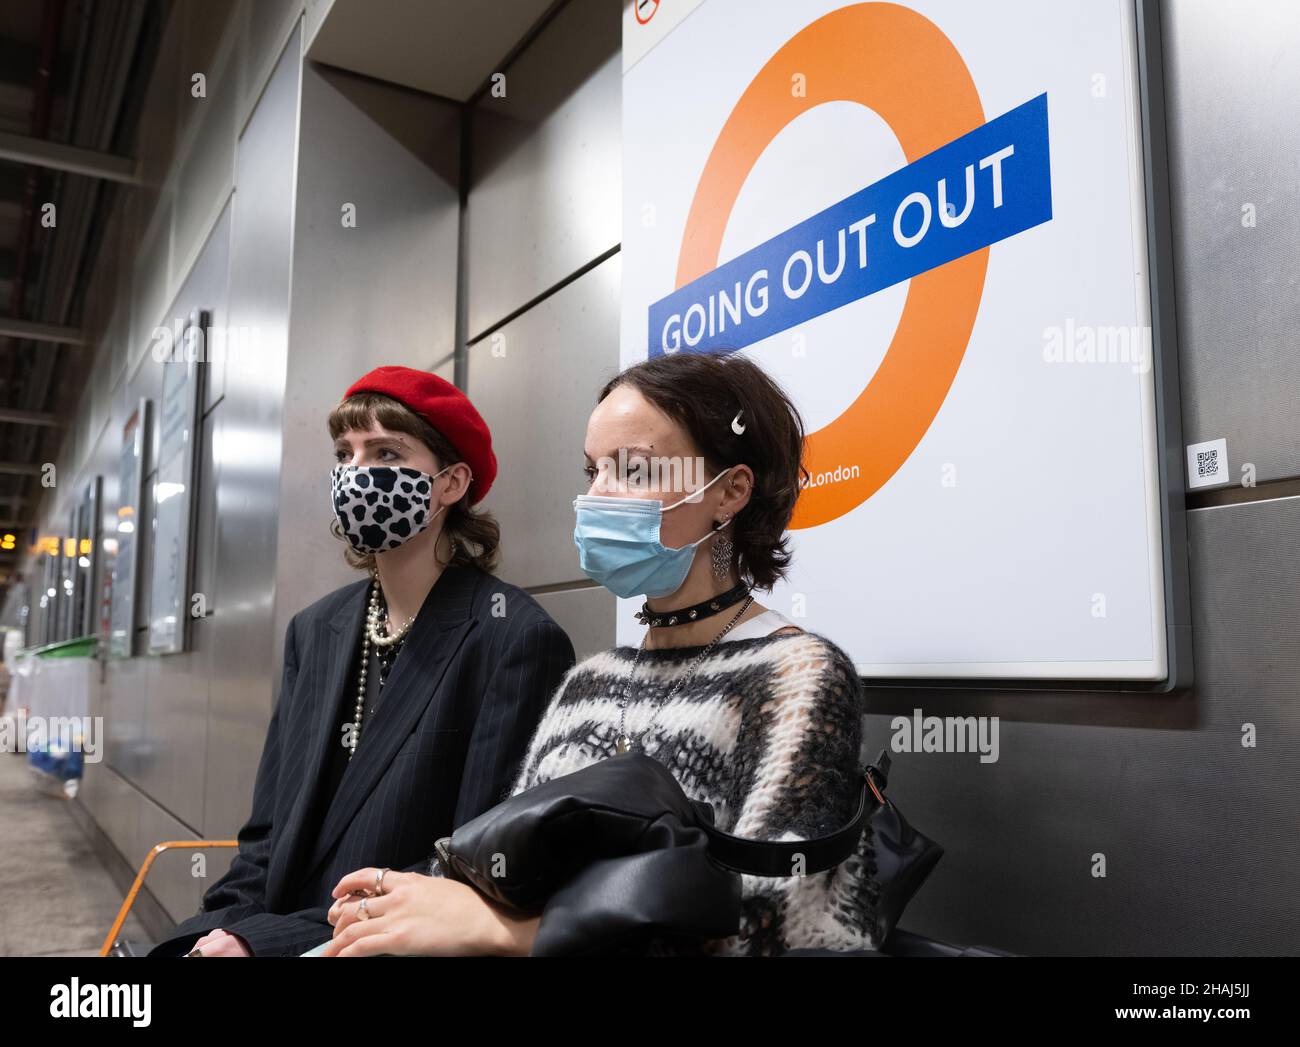 Shoreditch High Street station, 'Going Out Out' roundel on platform.  November 3, 2021.  Photo: Eleanor Bentall  Tel: +44 7768 377413. NB: NO SIGNED C Stock Photo